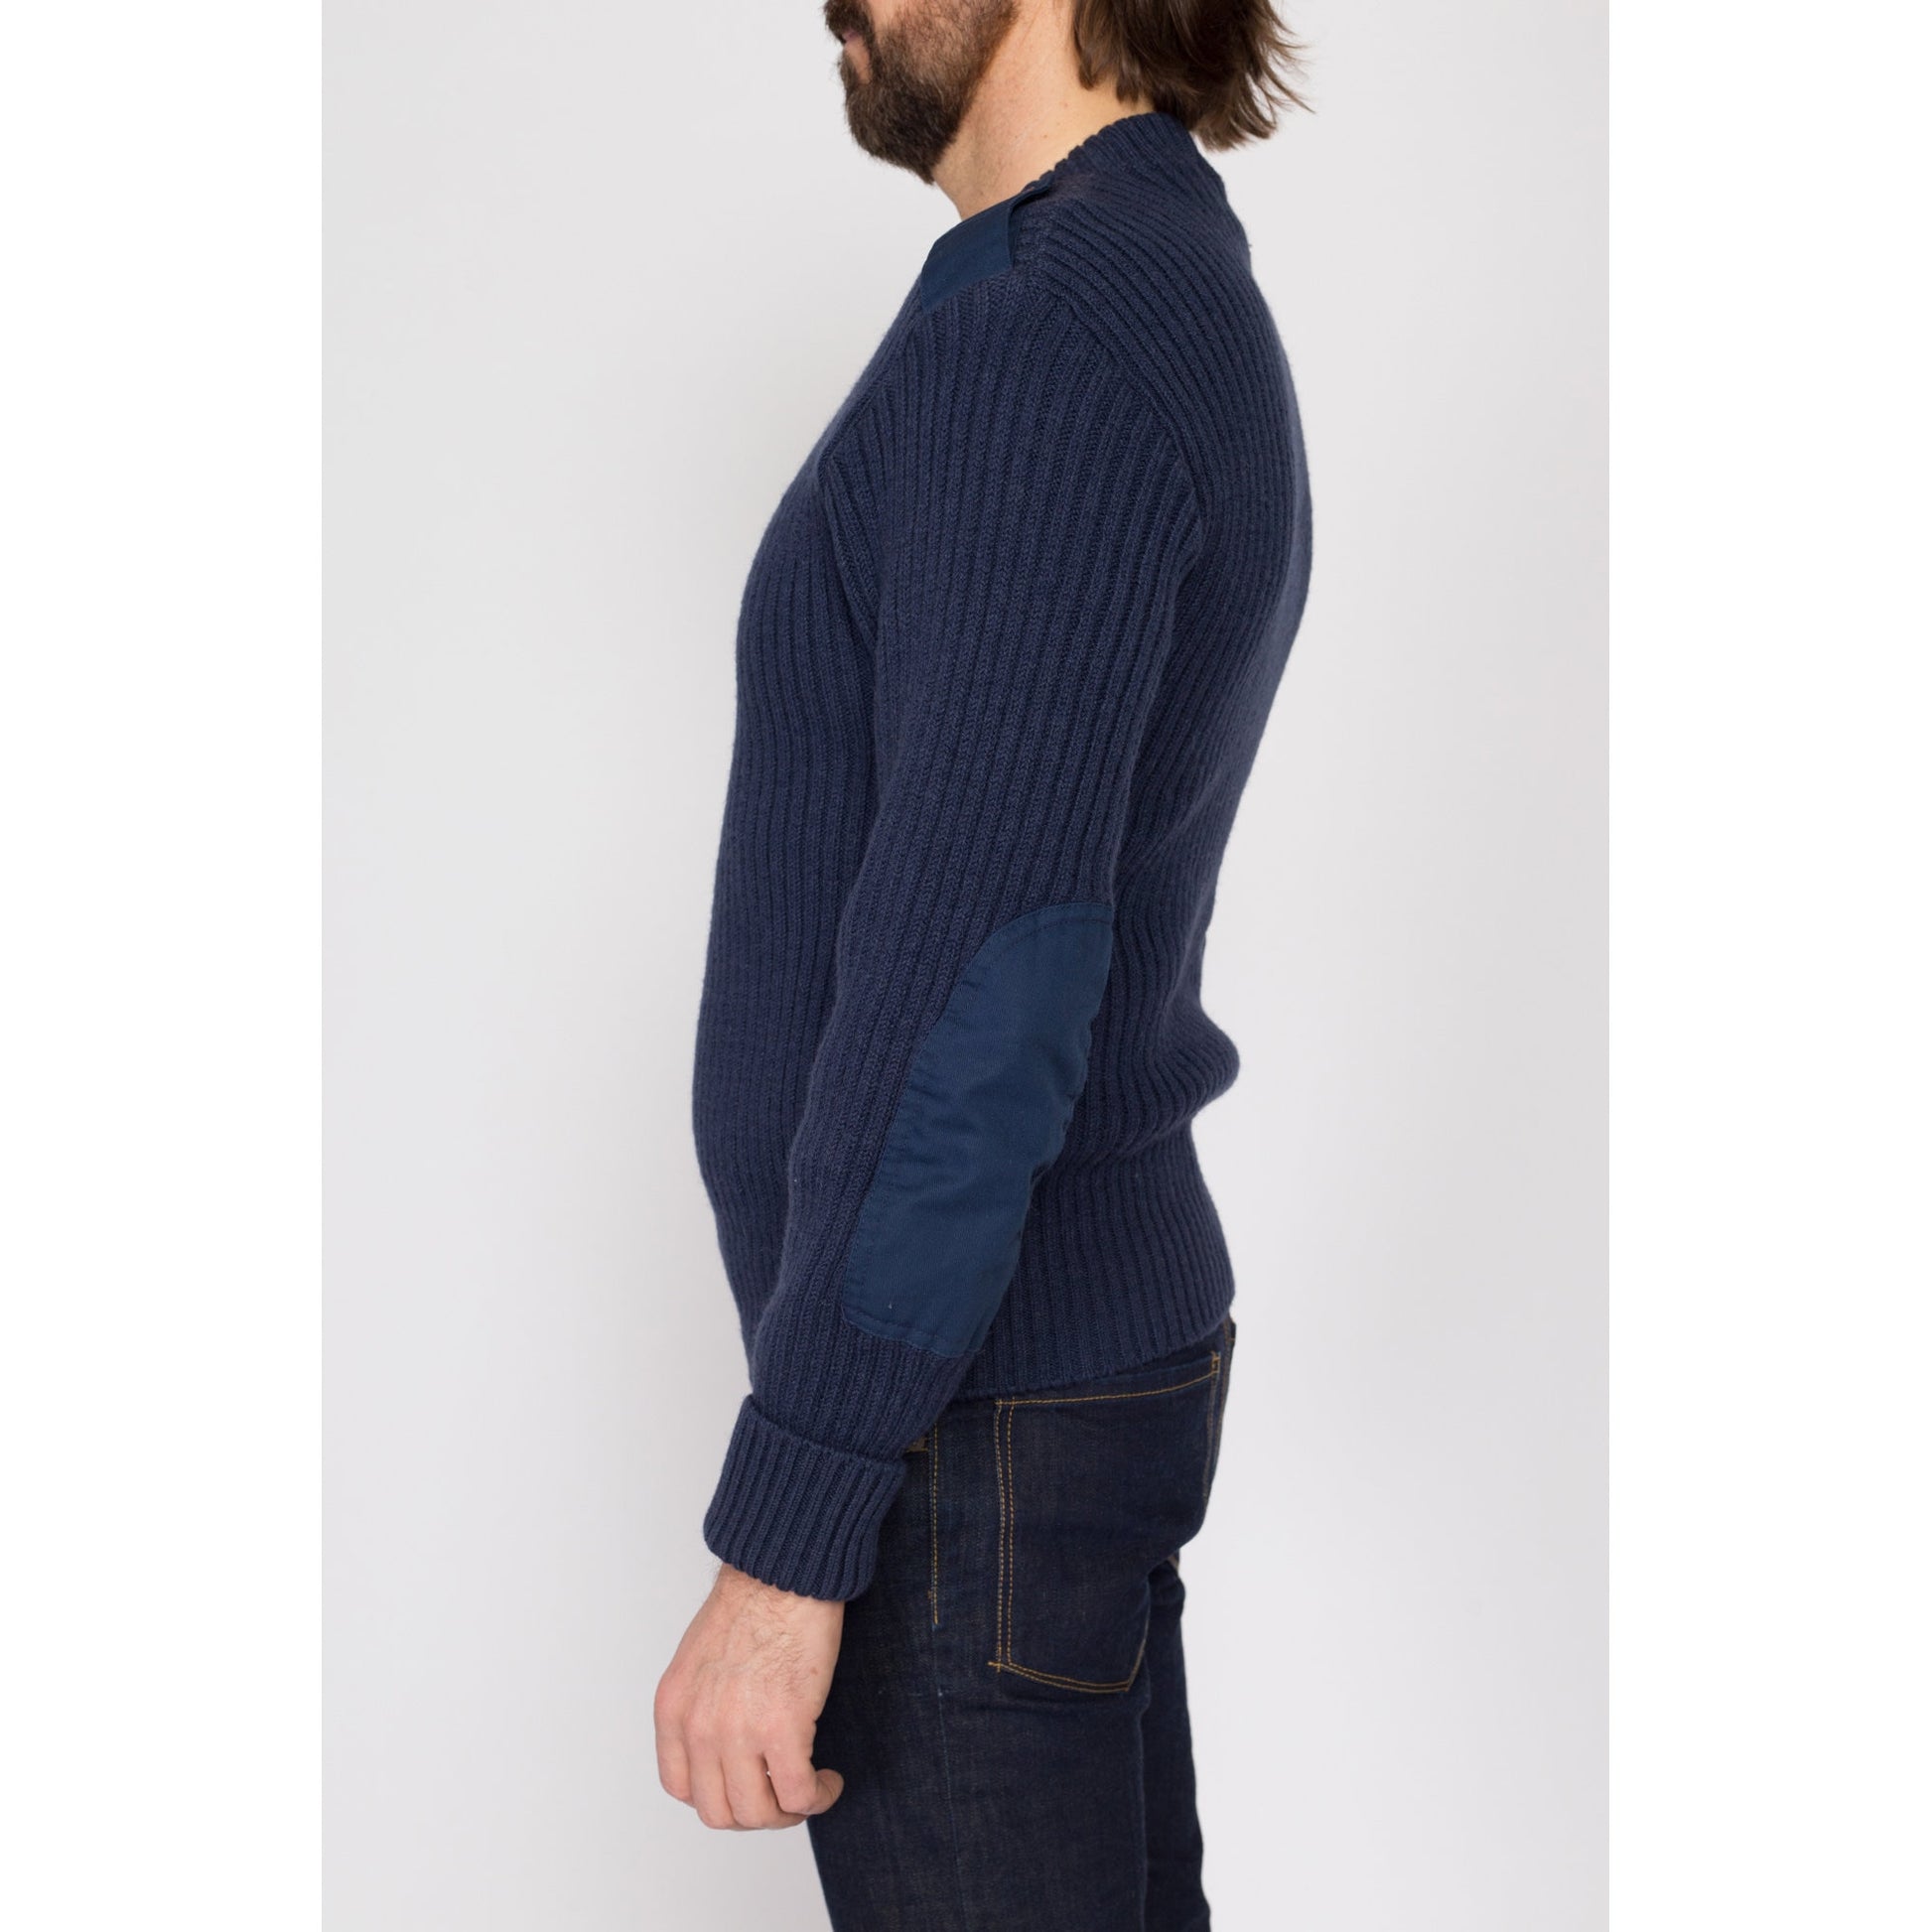 Med-Lrg 80s Navy Blue Ribbed Knit Commando Sweater | Vintage Wool Military Epaulette Elbow Patch Pullover